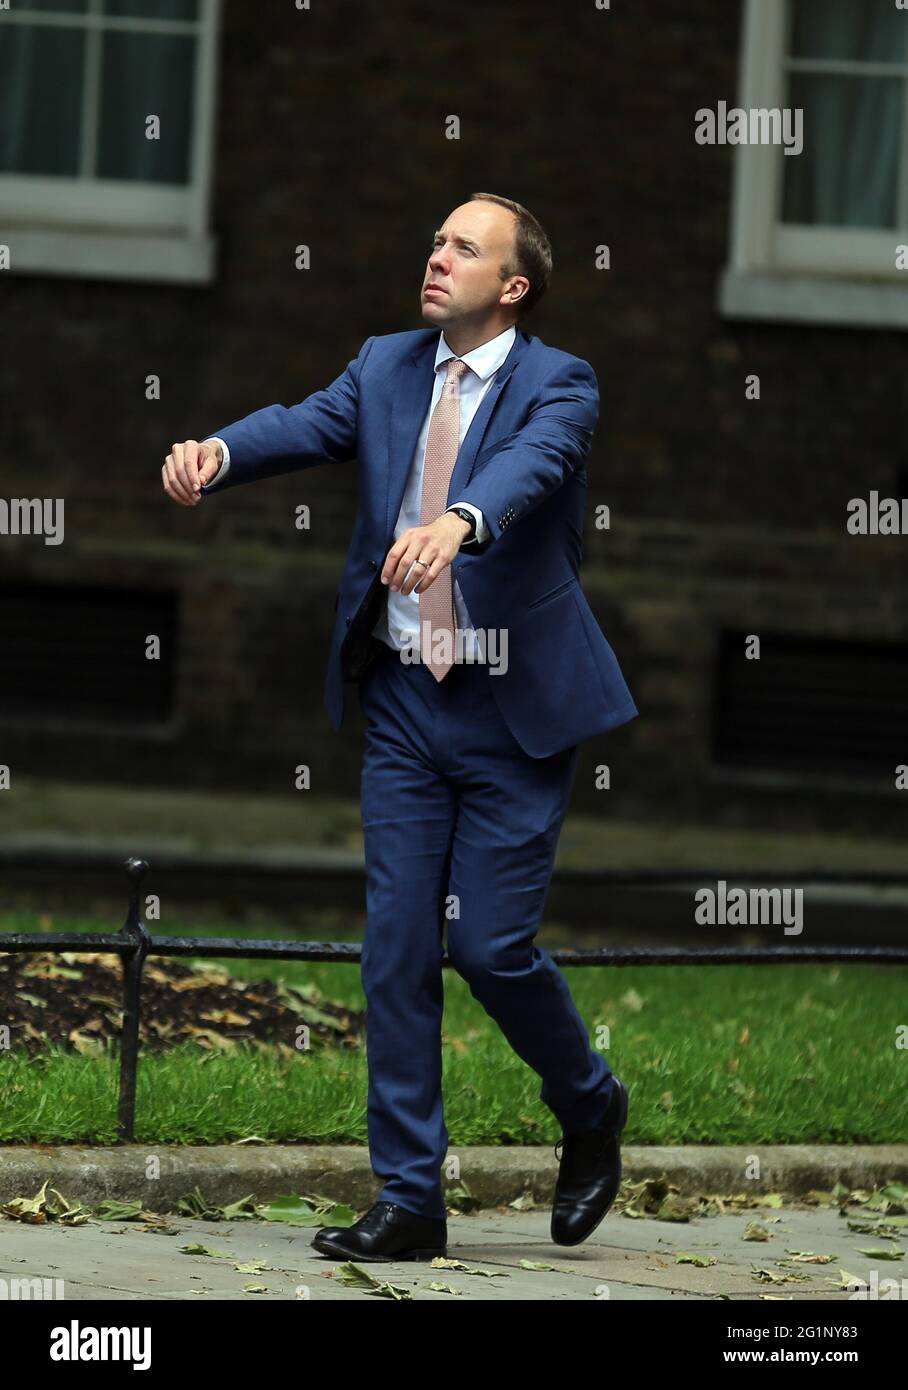 London, England, UK. 7th June, 2021. Secretary of State for Health and Social Care MATT HANCOCK is seen arriving at Downing Street. Credit: Tayfun Salci/ZUMA Wire/Alamy Live News Stock Photo